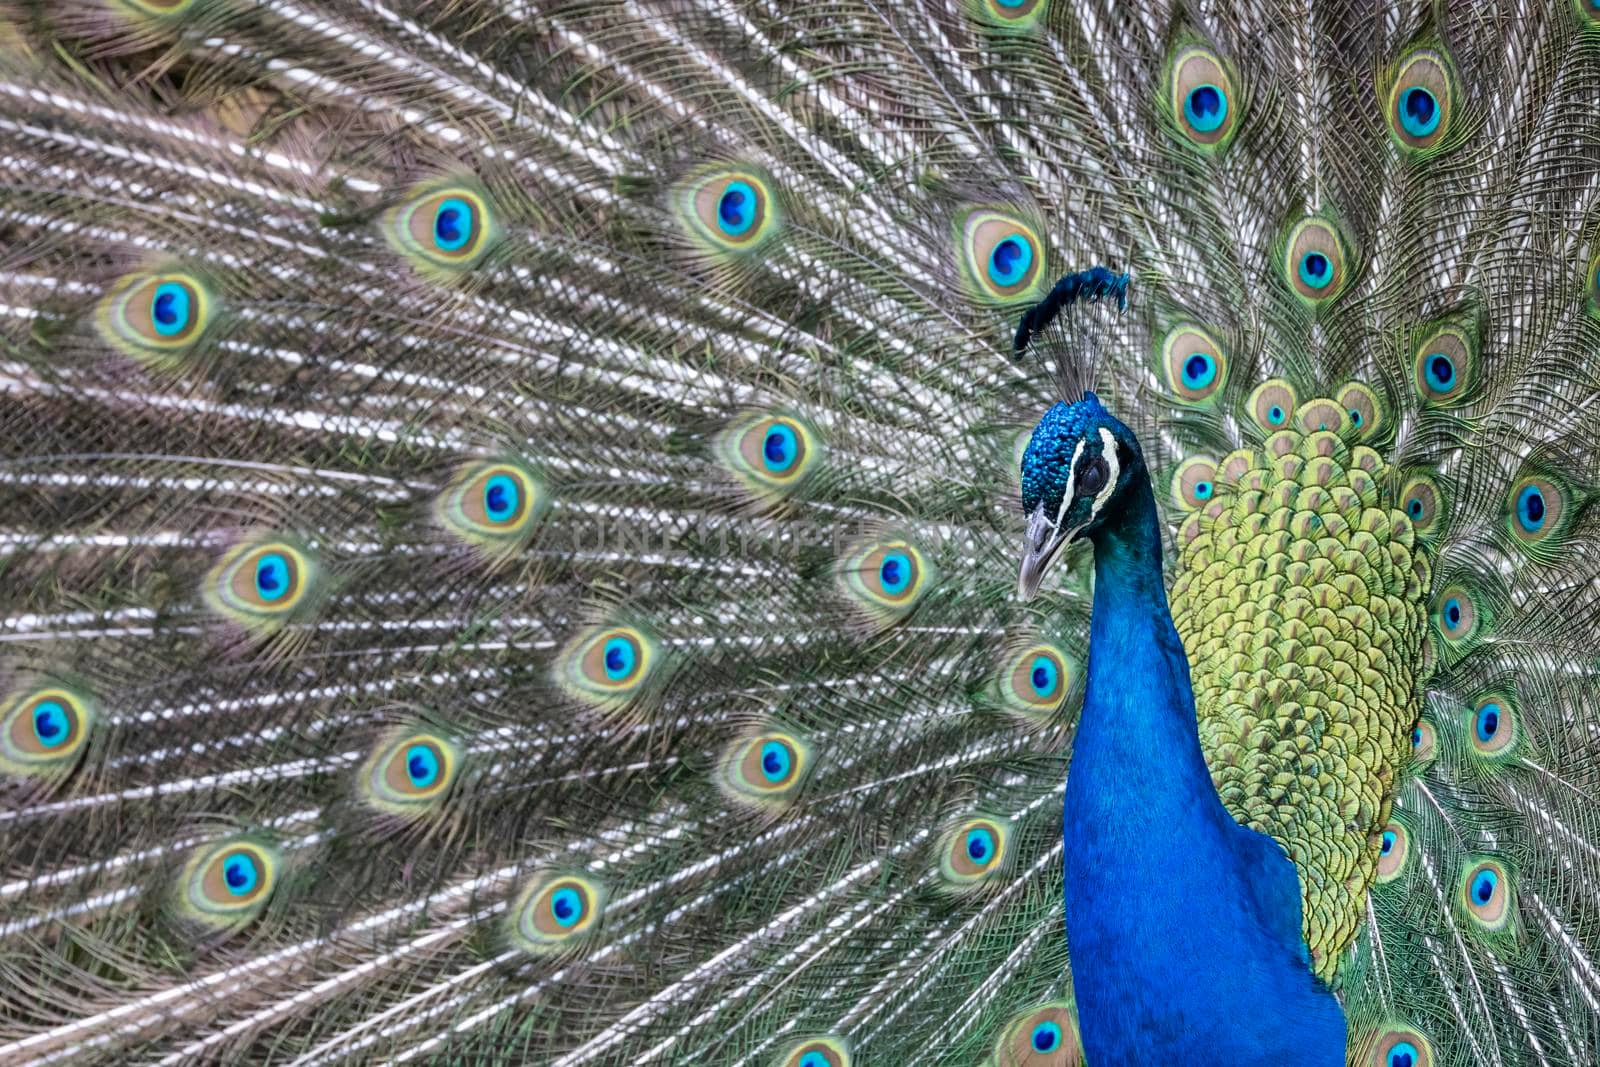 Closeup Image of a peacock dancing with its open feathers by phbcz